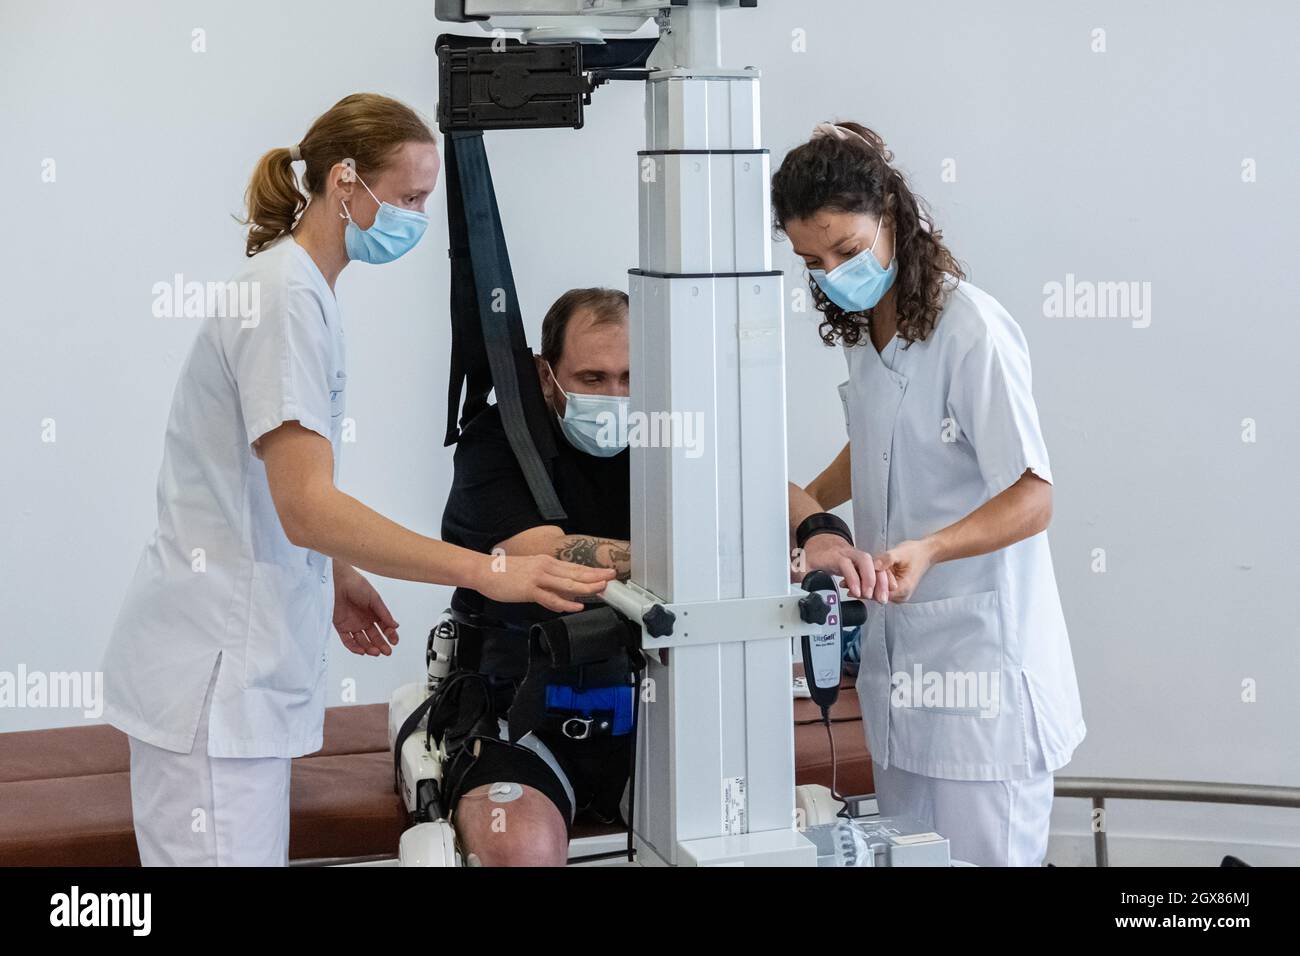 St Genis Laval (France), 4 October 2021. Rehabilitation session of a patient equipped with the HAL exoskeleton. Two nurses prepare the installation on Stock Photo